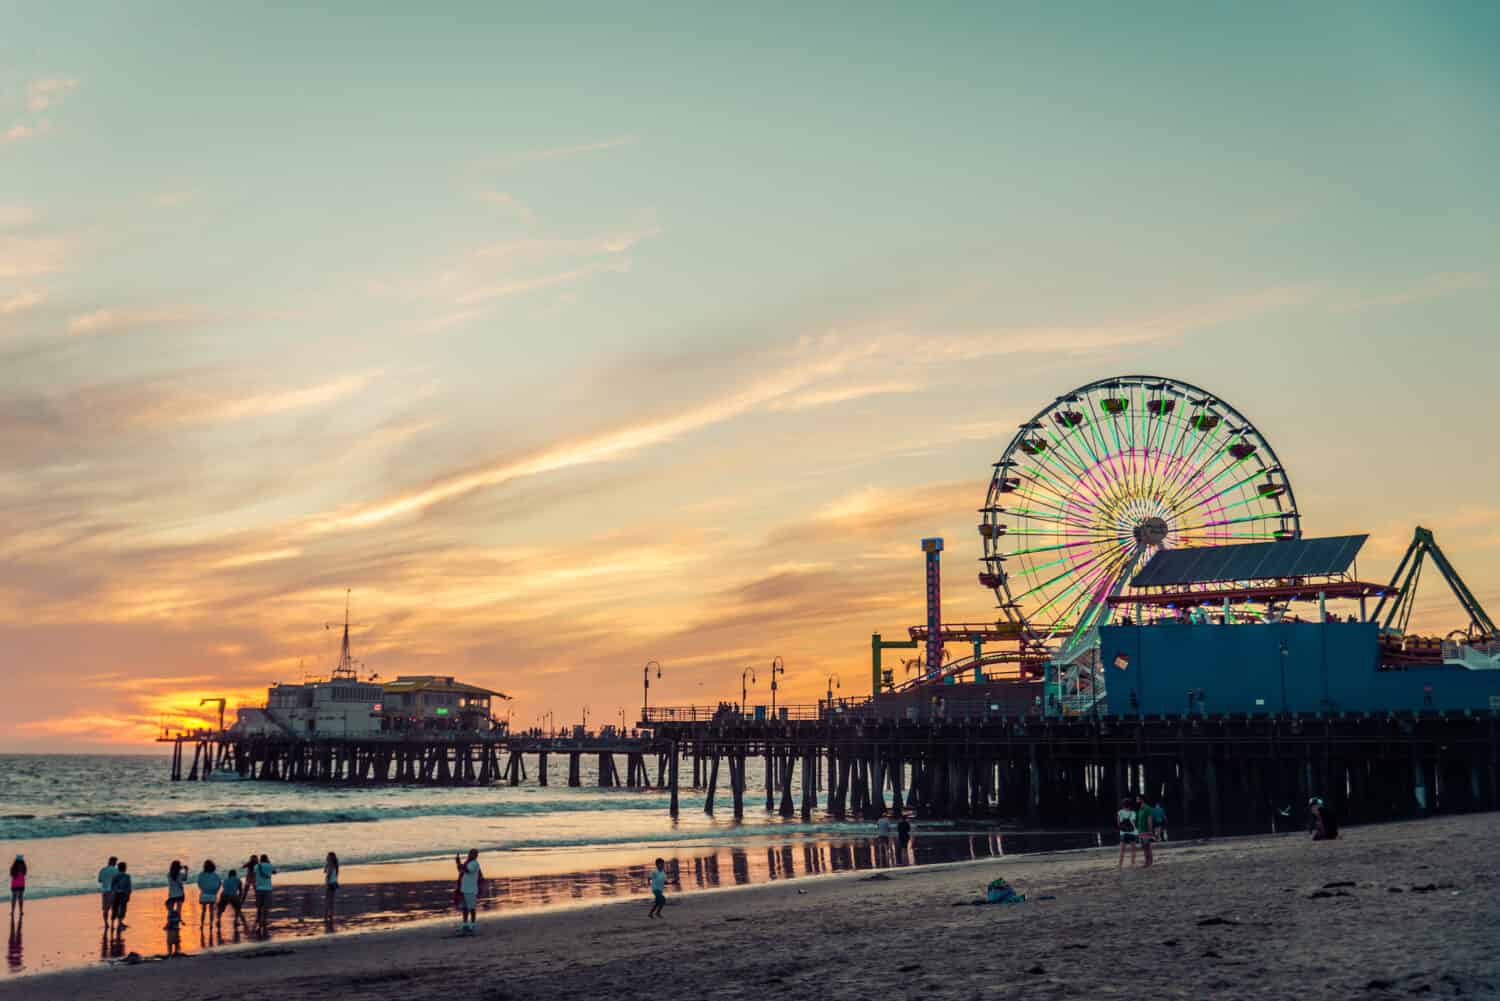 <p>Located in LA, Santa Monica Beach is popular for tourists of all ages, so it will be extremely overcrowded.</p><p>Sharks, lions, alligators, and more! Don’t miss today’s latest and most exciting animal news. <strong><a href="https://www.msn.com/en-us/channel/source/AZ%20Animals%20US/sr-vid-7etr9q8xun6k6508c3nufaum0de3dqktiq6h27ddeagnfug30wka">Click here to access the A-Z Animals profile page</a> and be sure to hit the <em>Follow</em> button here or at the top of this article!</strong></p> <p>Have feedback? Add a comment below!</p>